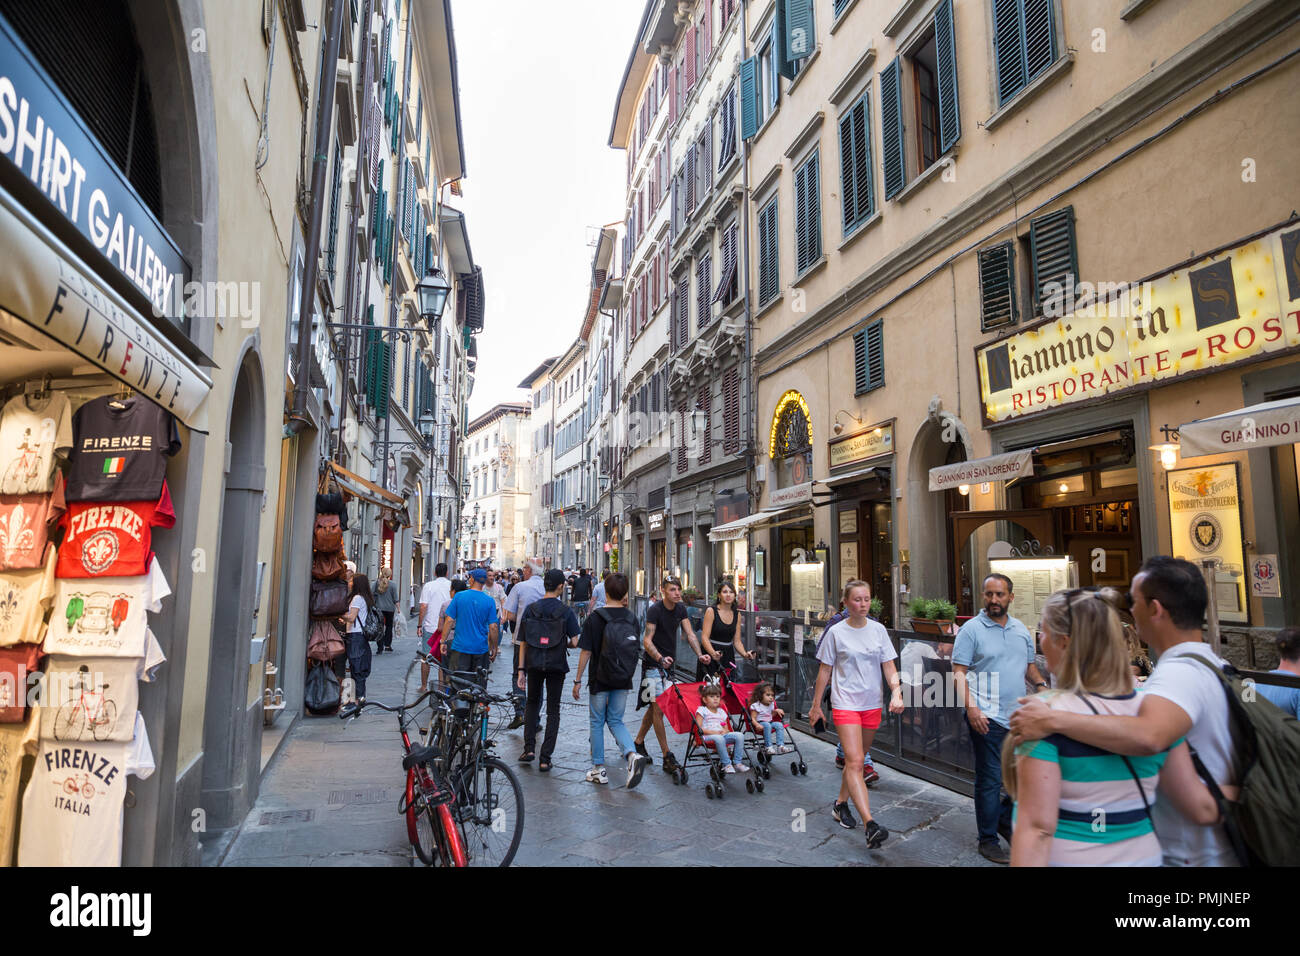 ITALY - FLORENCE - SEPTEMBER 3: People are enjoying the streets in Florence Italy on September 3 2018. Stock Photo